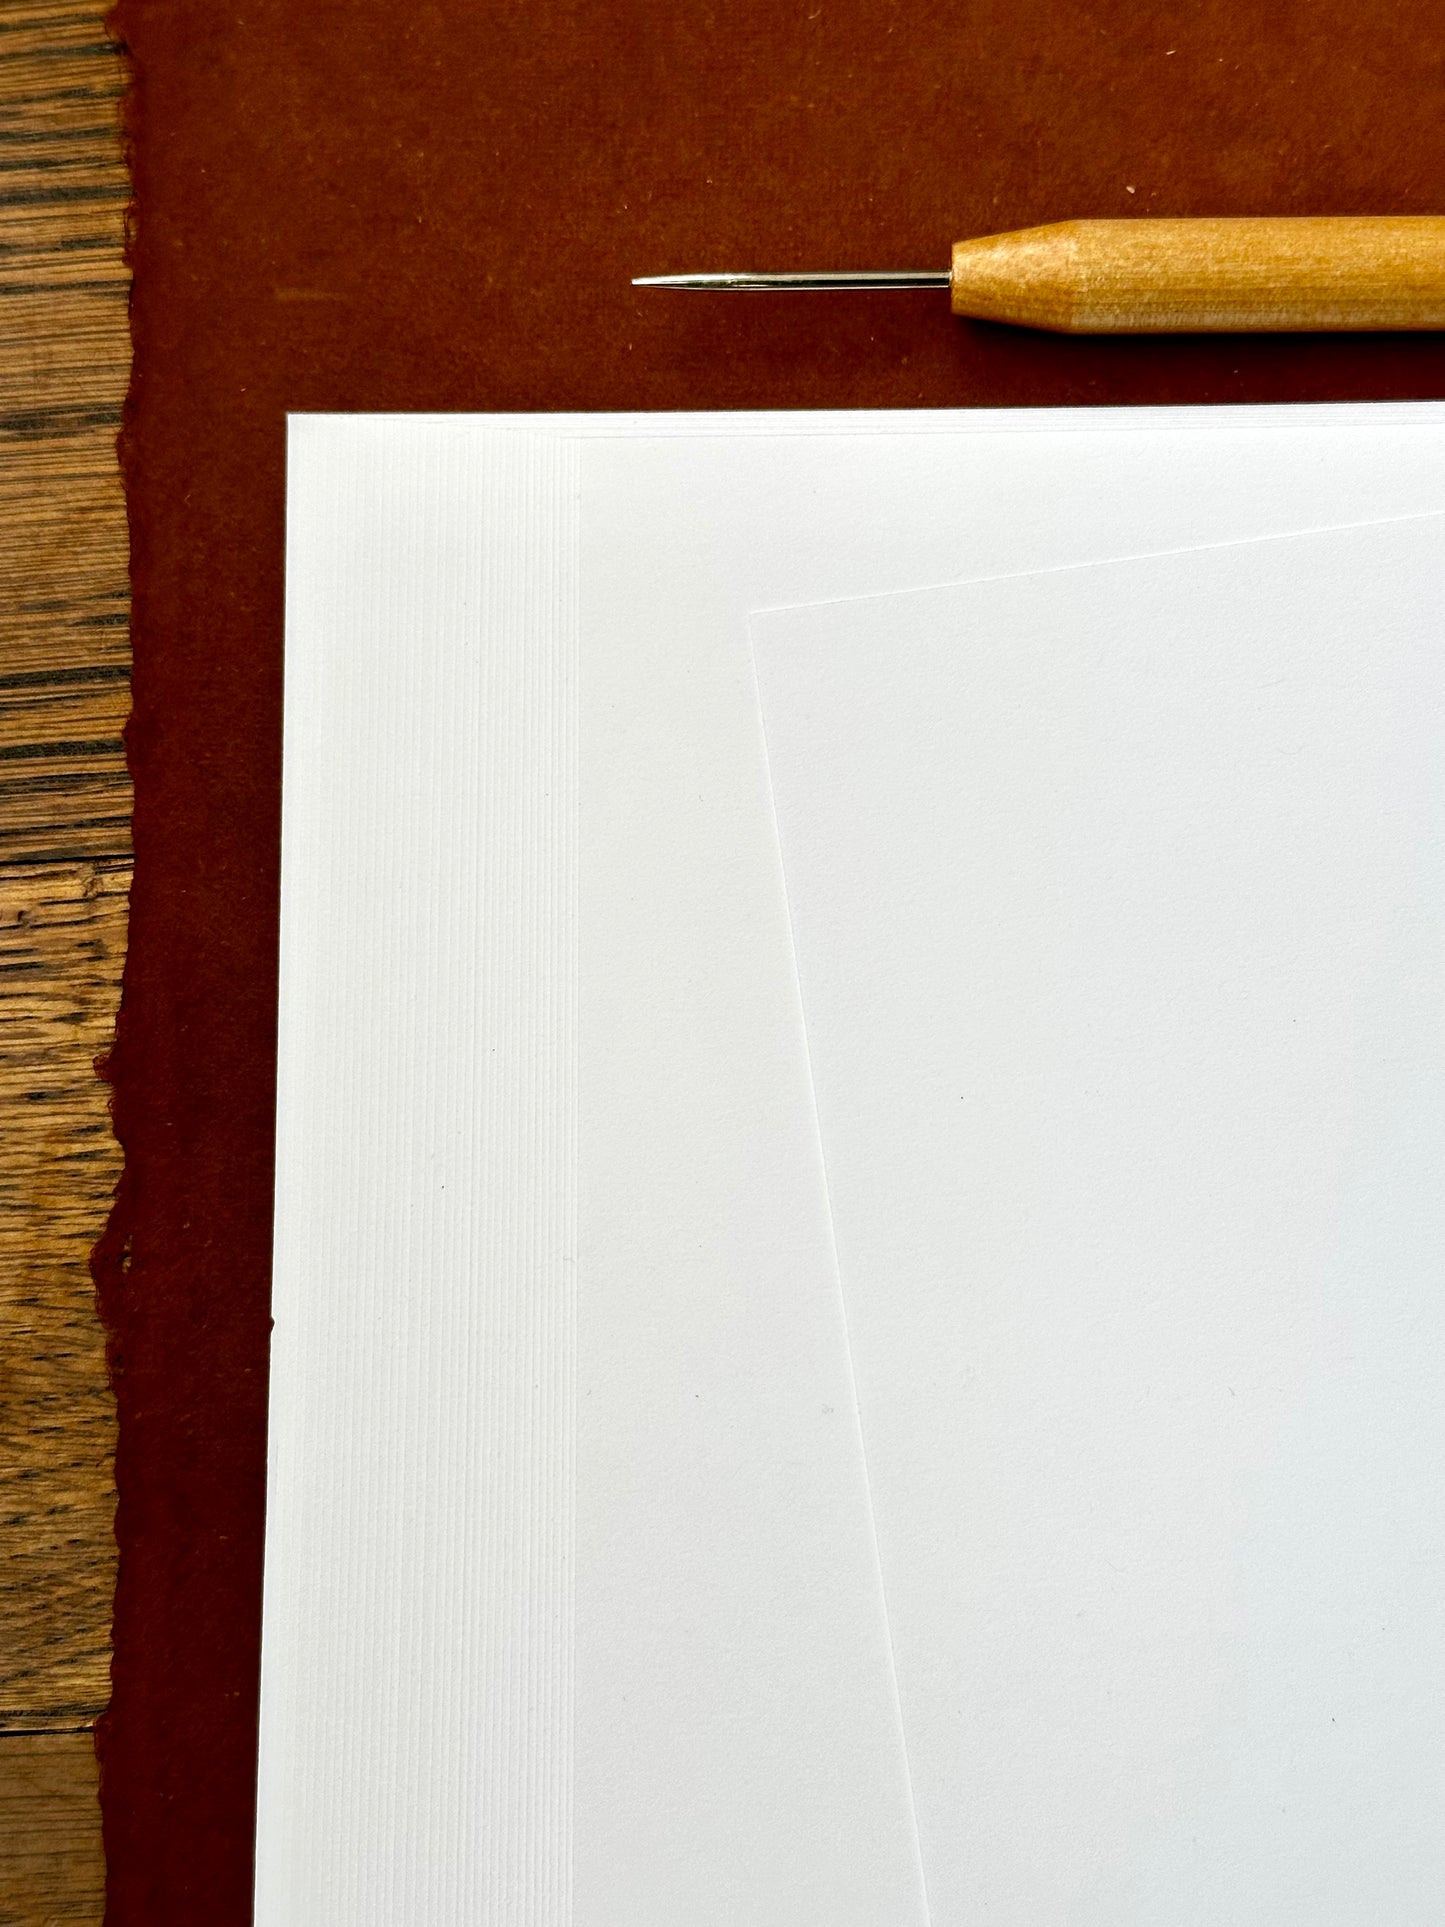 BLANK Short Grain Bookbinding Paper - 8.5" x 11"-  to enhance your book binding projects.  This smooth finish, 70 lb. text weight white paper is 20% post consumer waste and acid free, ensuring high quality and eco-friendly book binding projects.